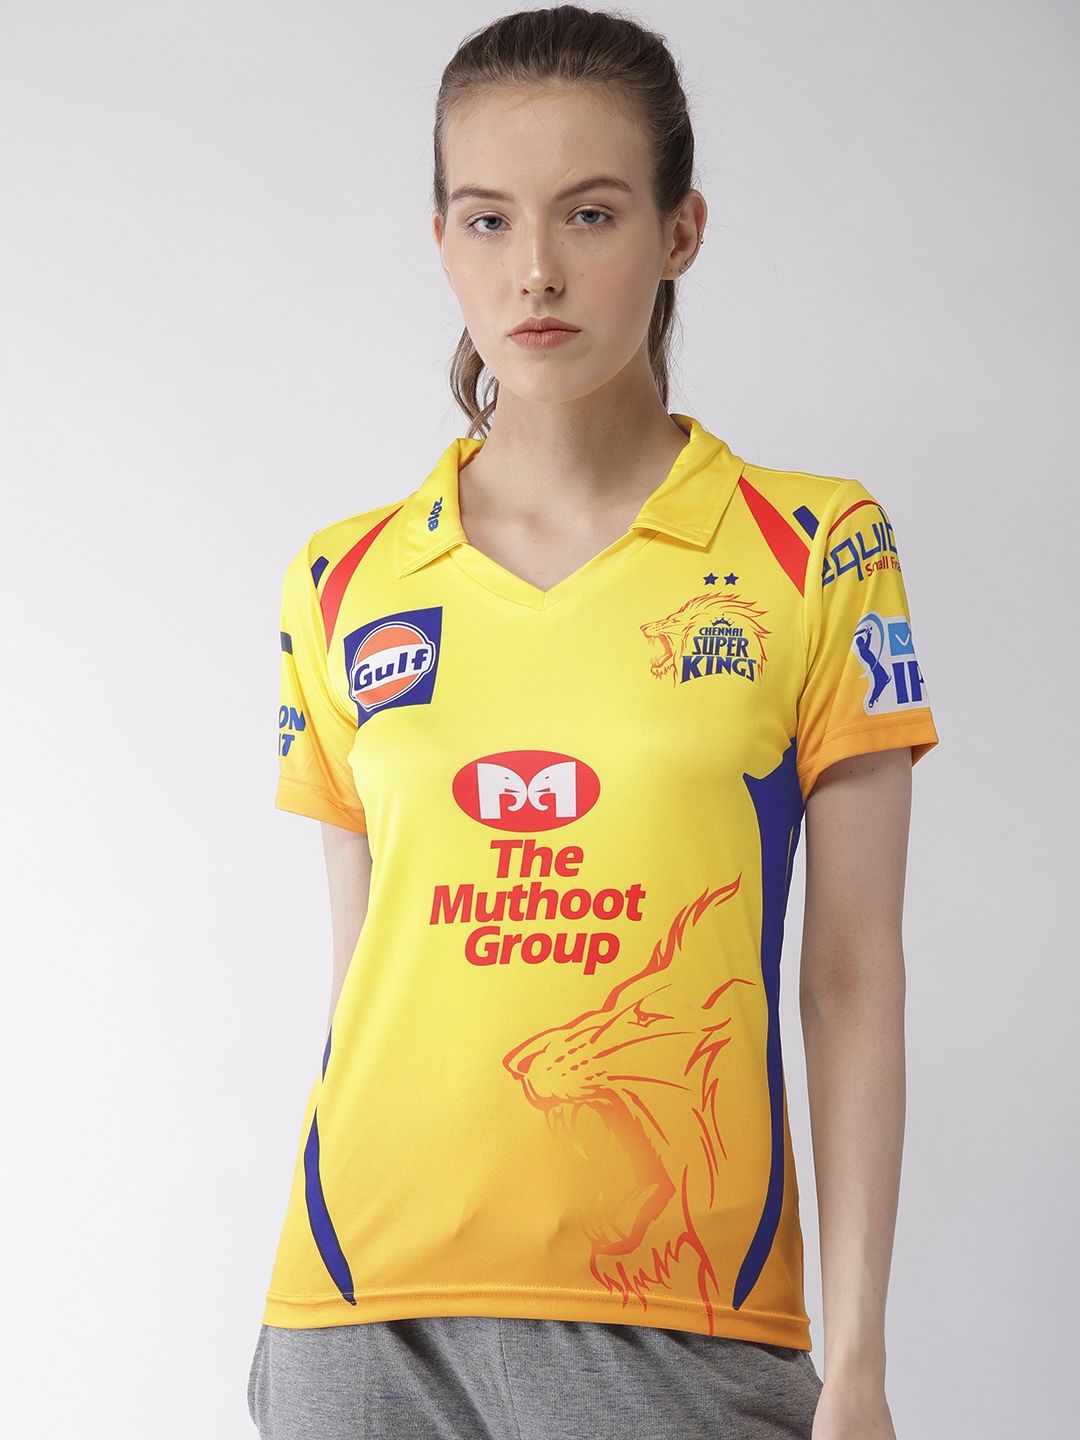 dhoni jersey online shopping